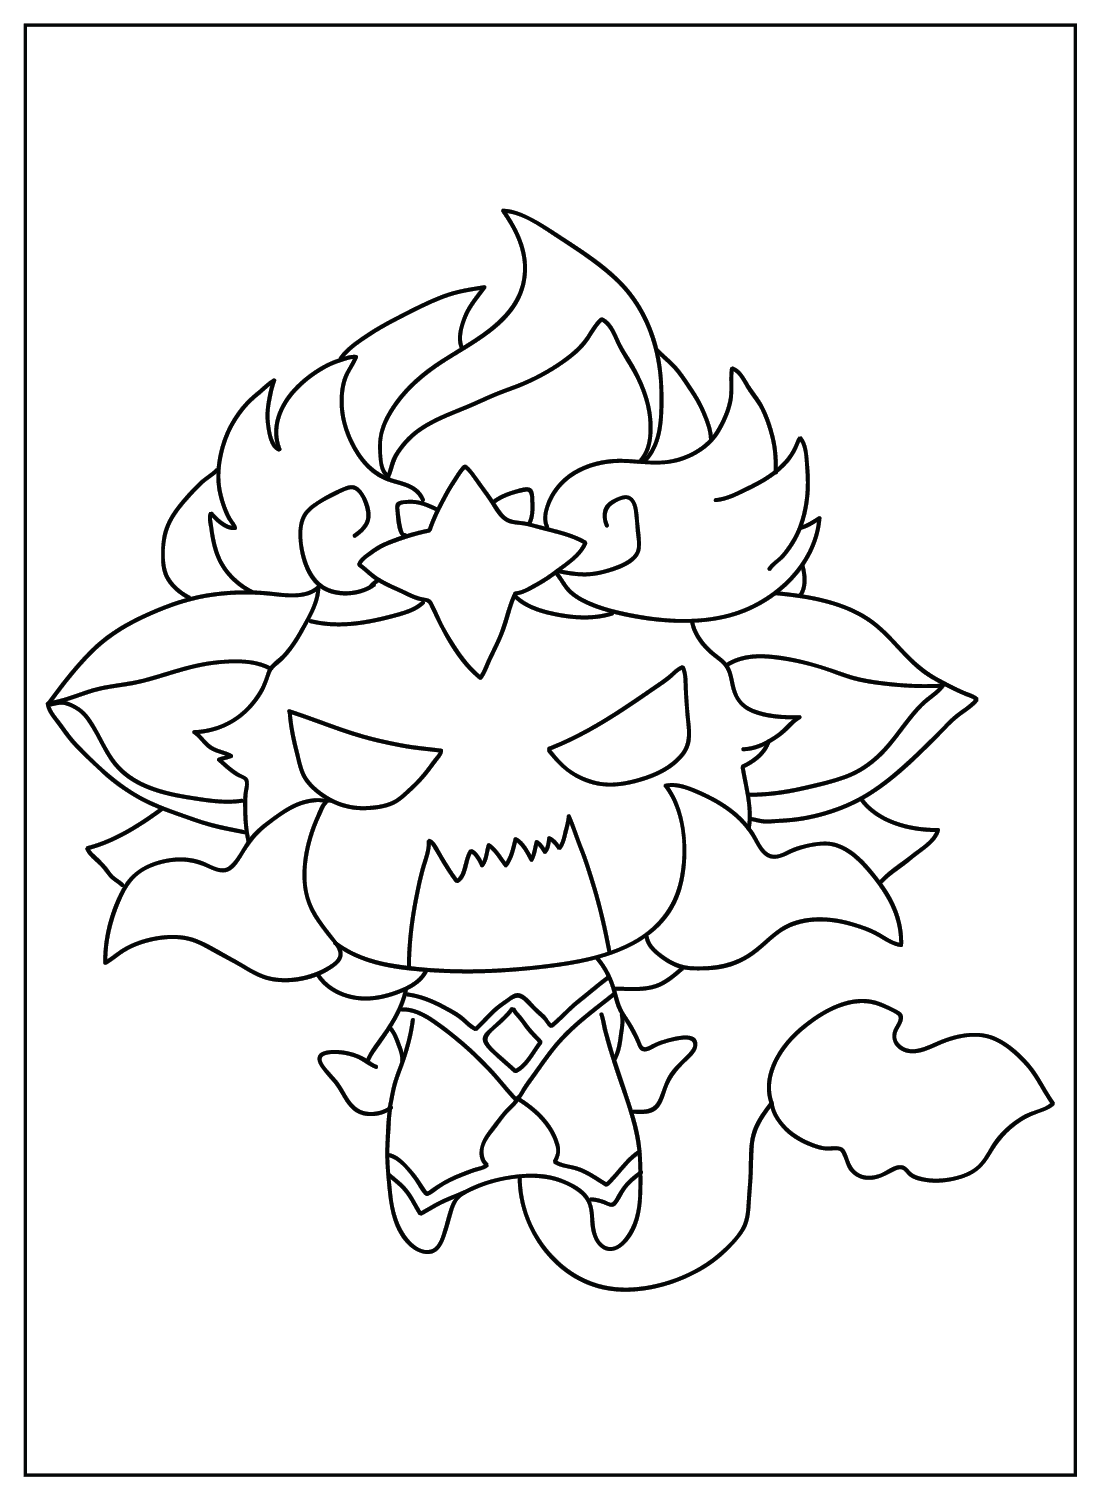 Shisa Teamfight Tactics Coloring Page from Teamfight Tactics